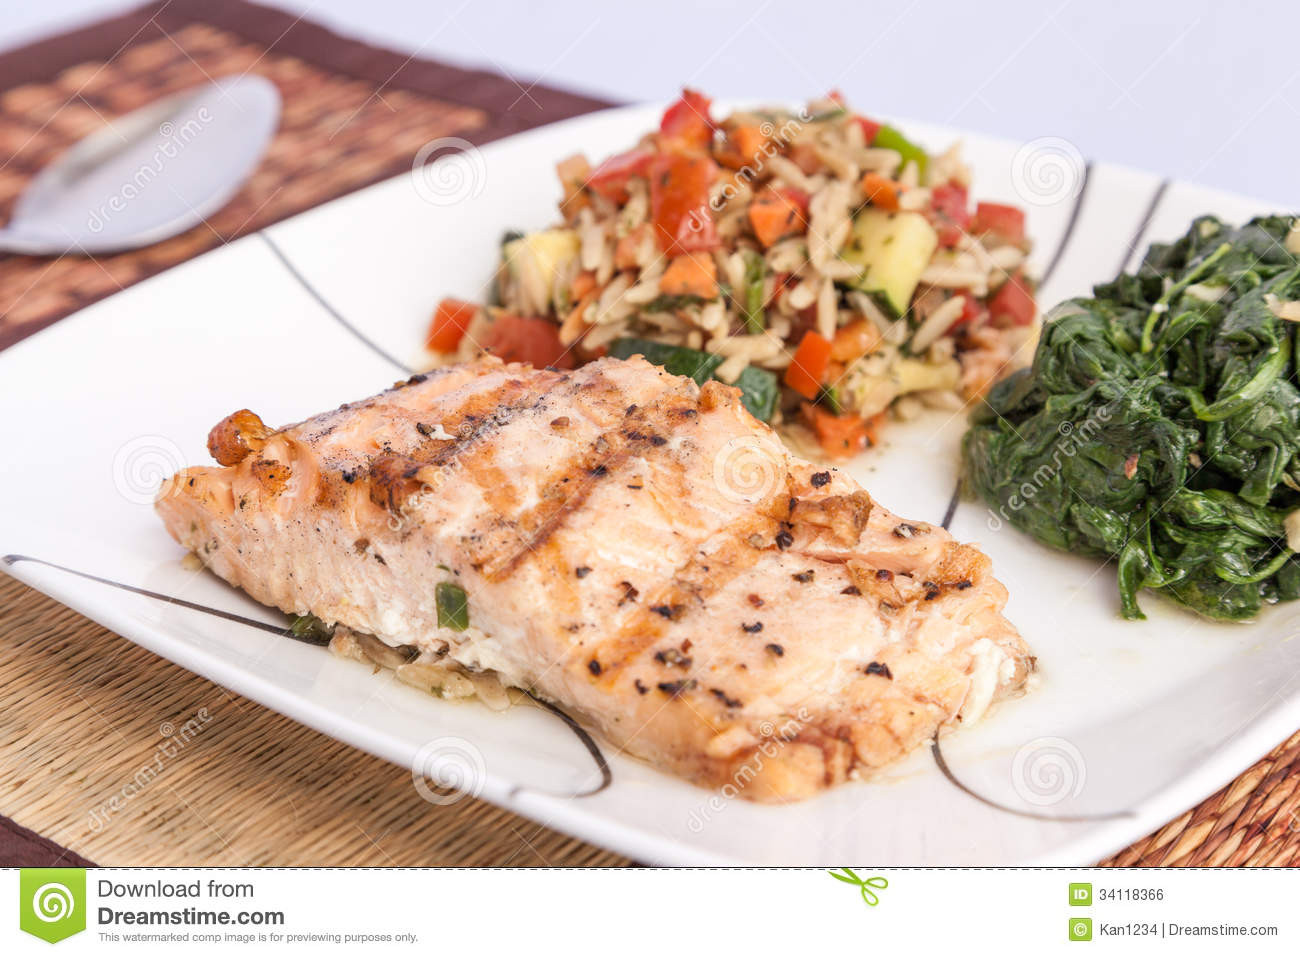 Healthy Side Dishes For Salmon
 Delicious Grill Salmon With Side Dishes Royalty Free Stock